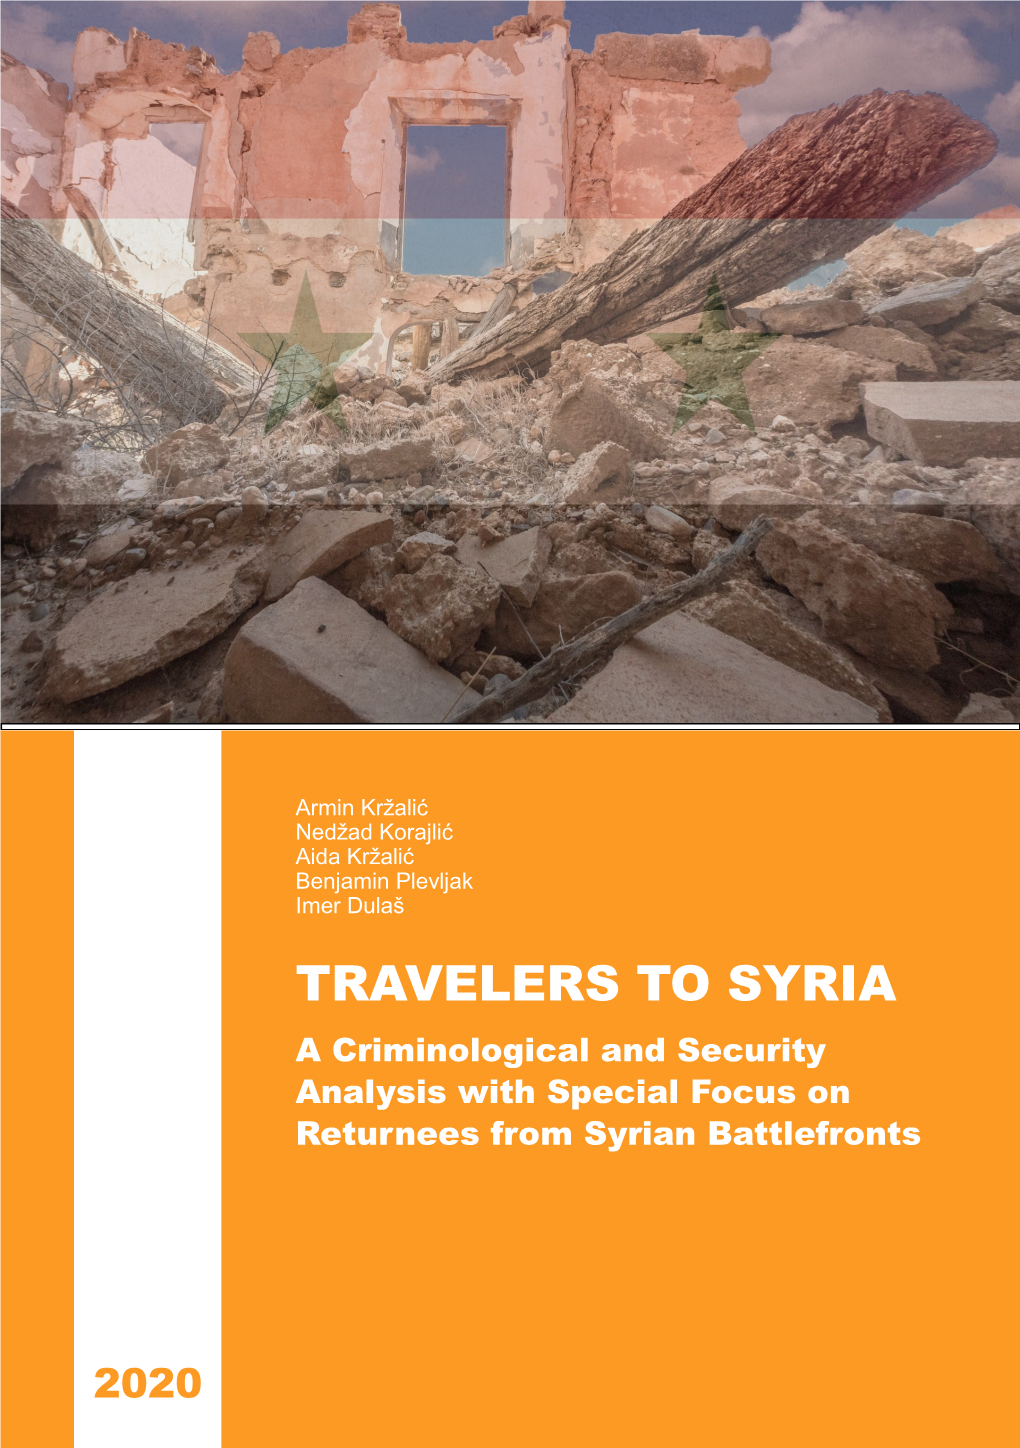 TRAVELERS to SYRIA a Criminological and Security Analysis with Special Focus on Returnees from Syrian Battlefronts